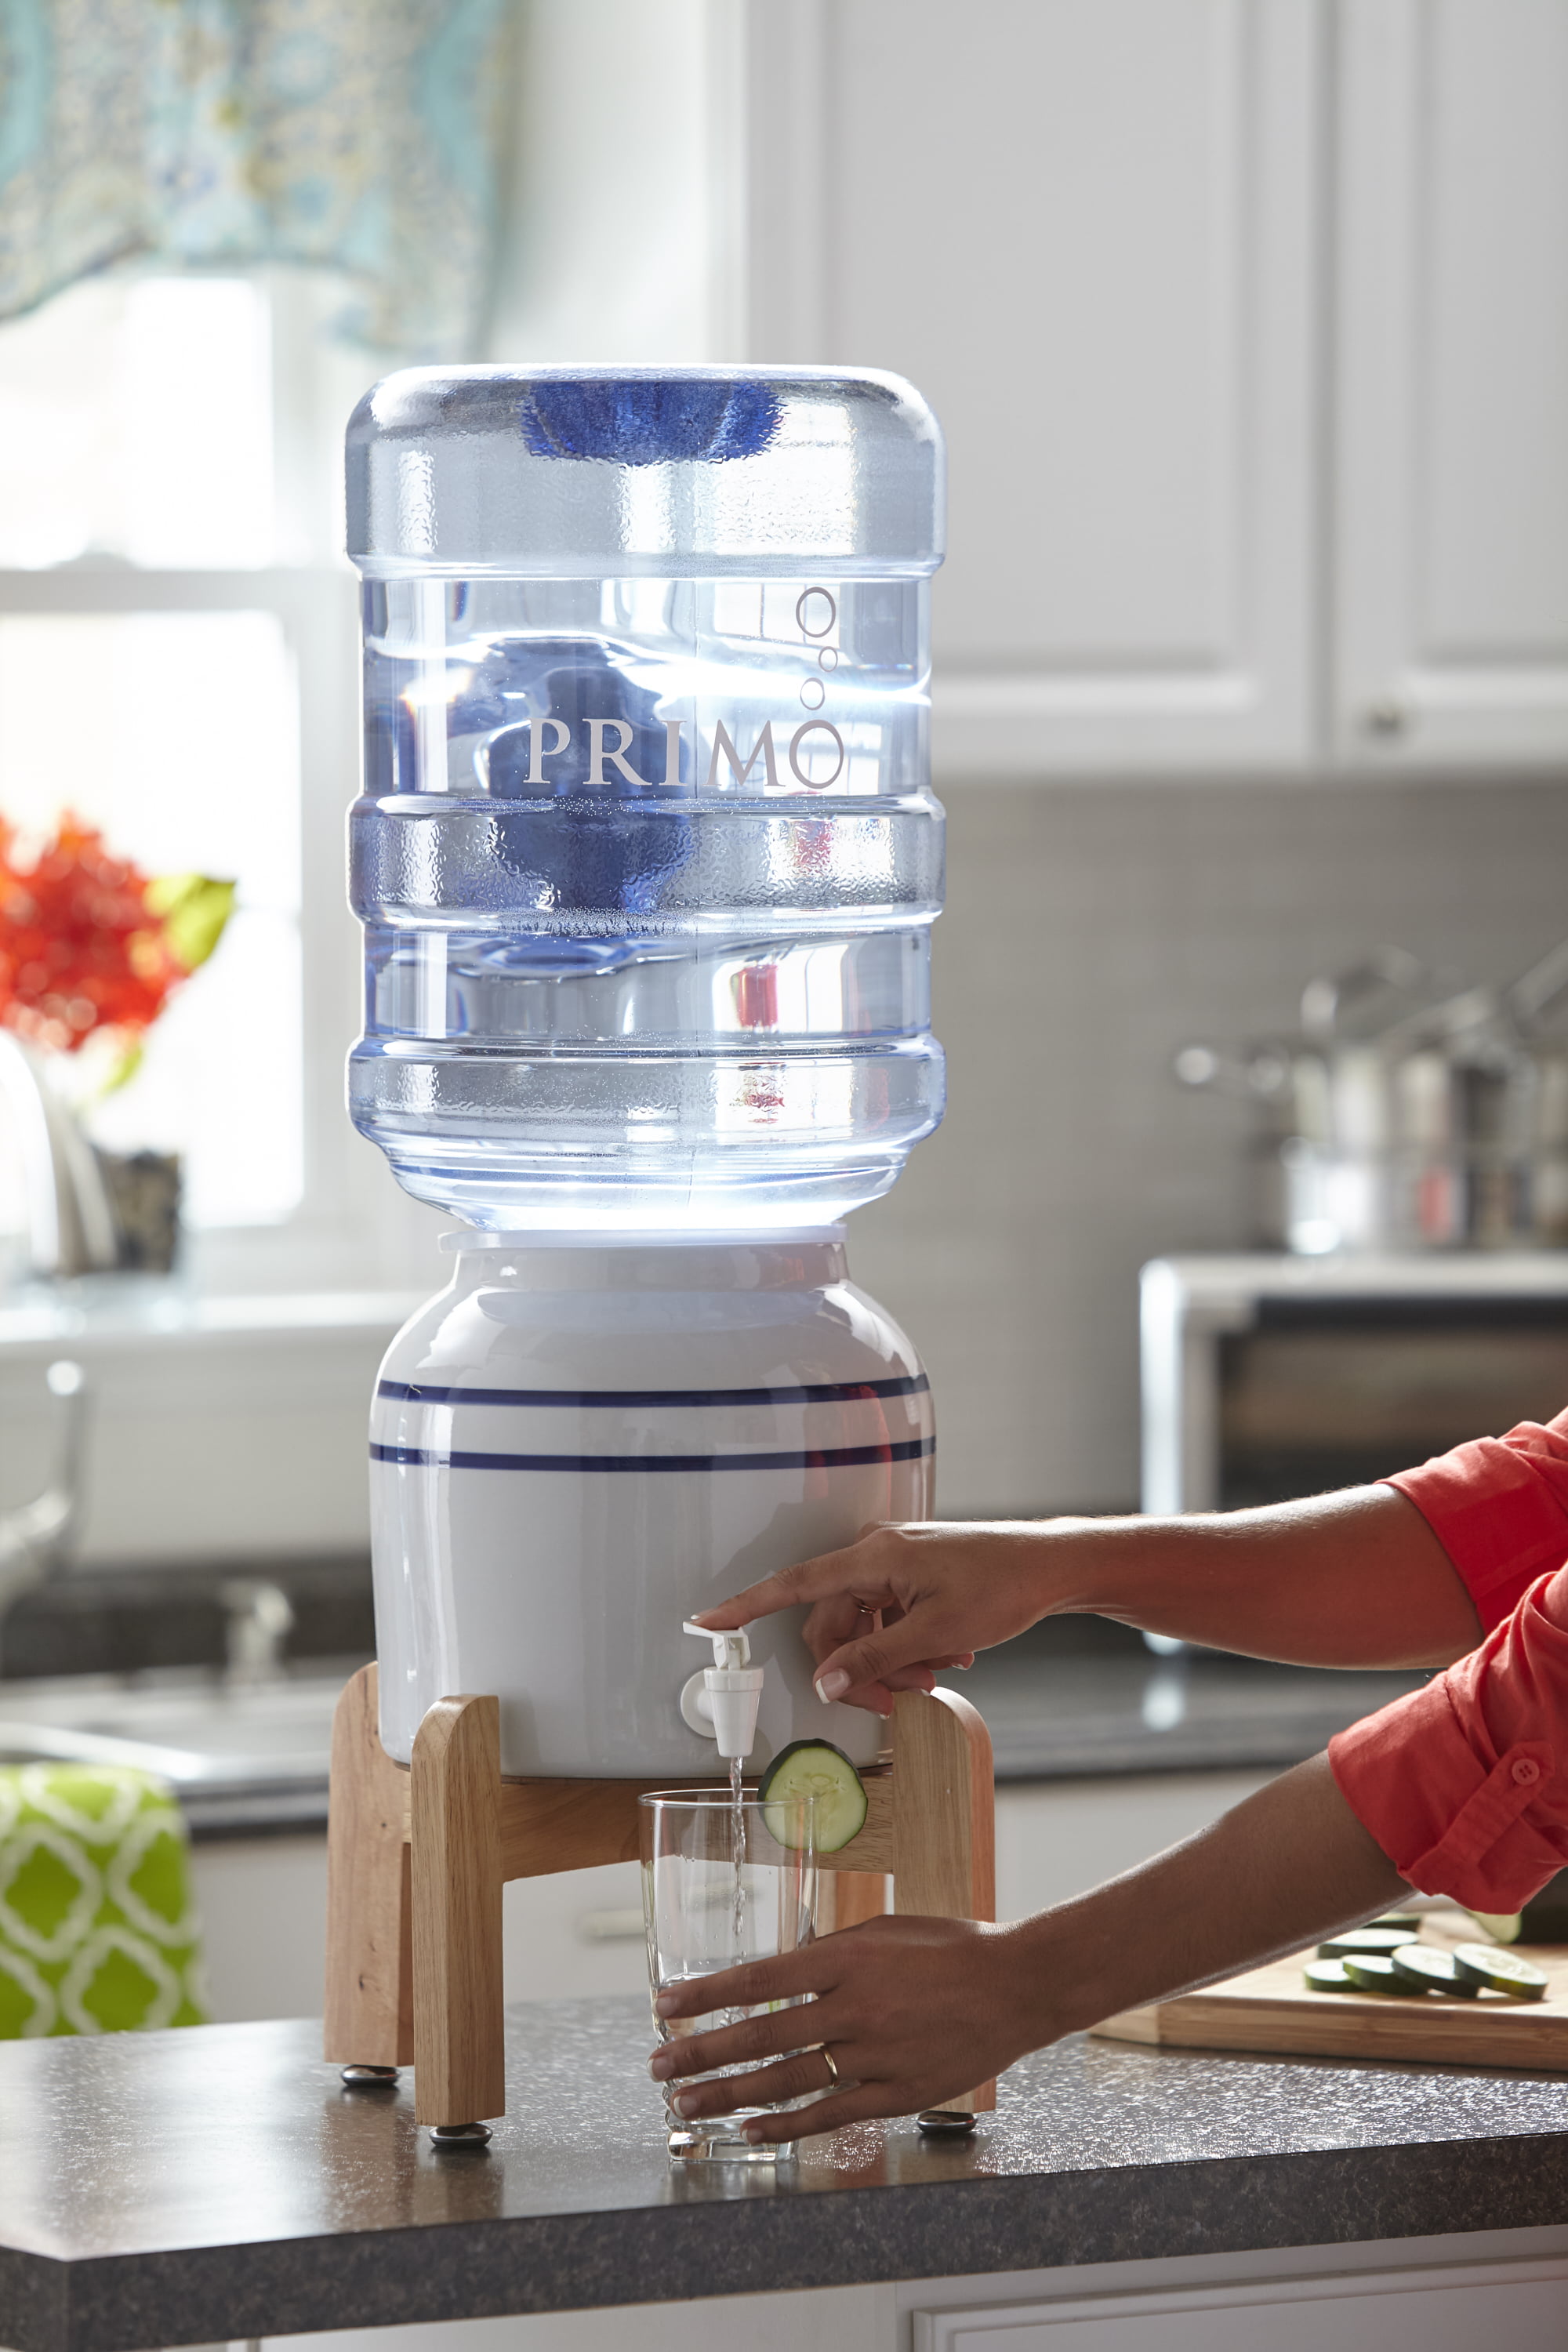 Primo Ceramic Water Dispenser With Stand Model 900114 Walmart